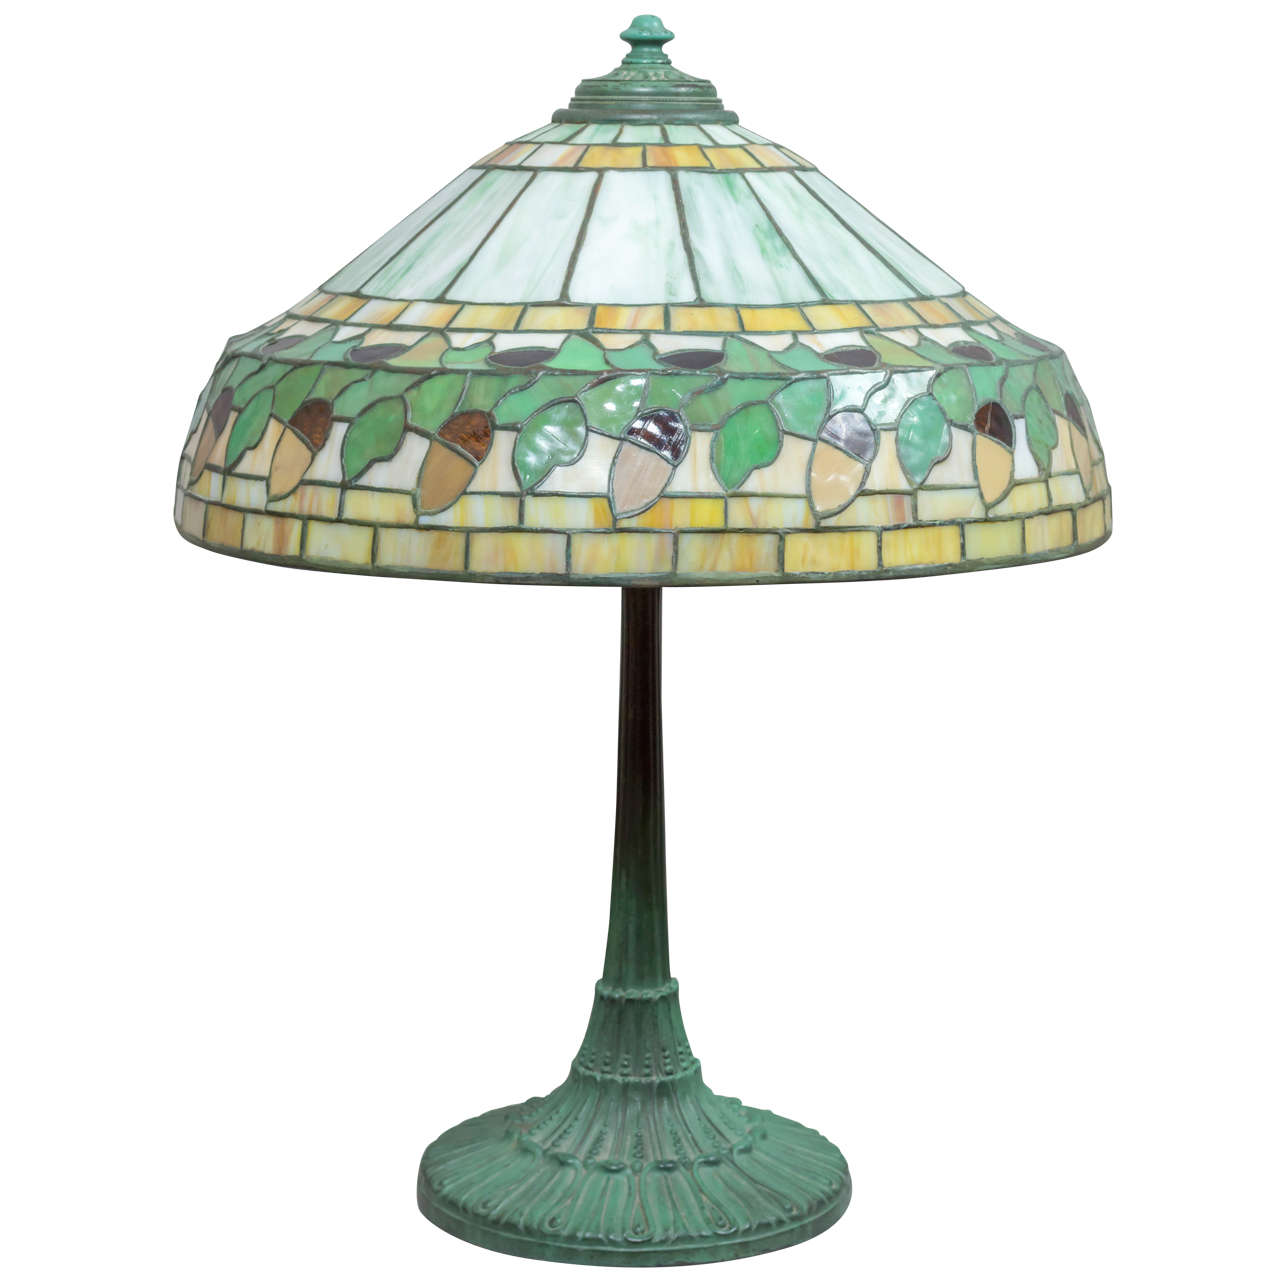 This very nice example of the work of the Wilkinson Company is a rare model. With an acorn border and colorful segments of geometric patterns in light and dark green and amber. The base is one of Wilkinson's finest and having an original luscious